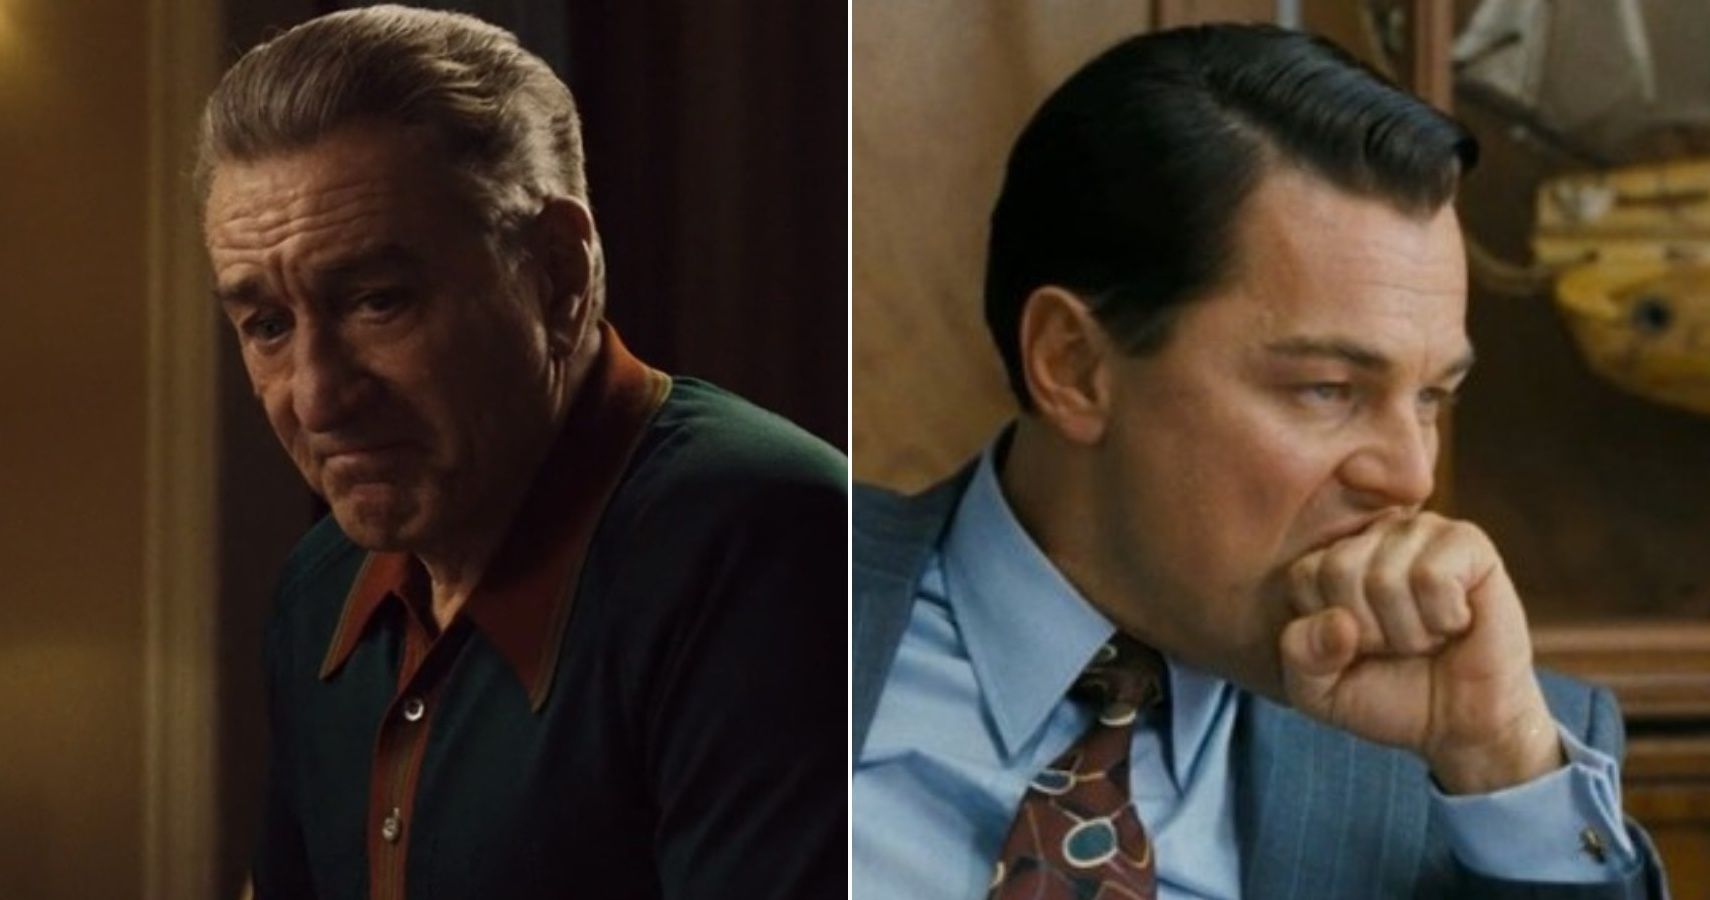 Martin Scorsese 5 Reasons His Movies With Robert De Niro Are His Best (And 5 Its His Movies With Leonardo DiCaprio)